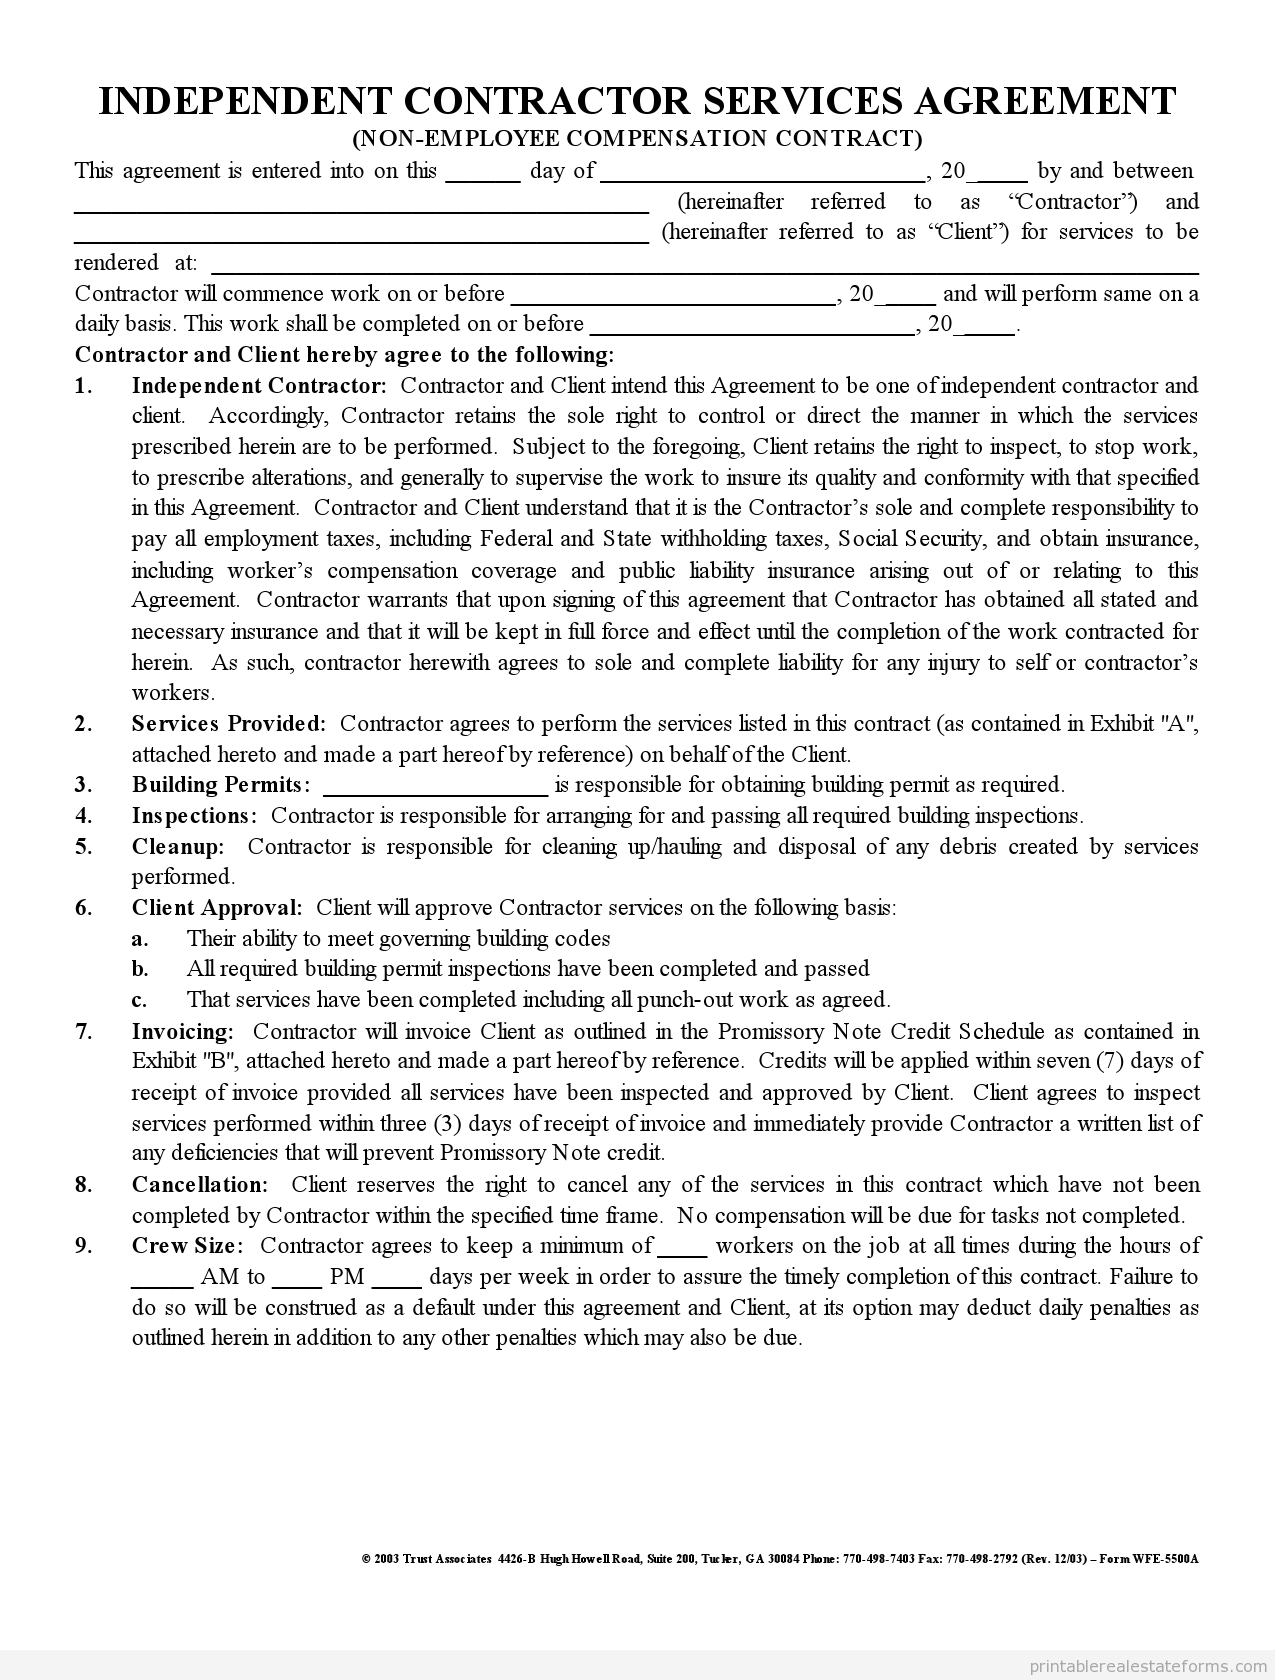 Free Printable Independent Contractor Agreement Form | Printable - Free Printable Handyman Contracts